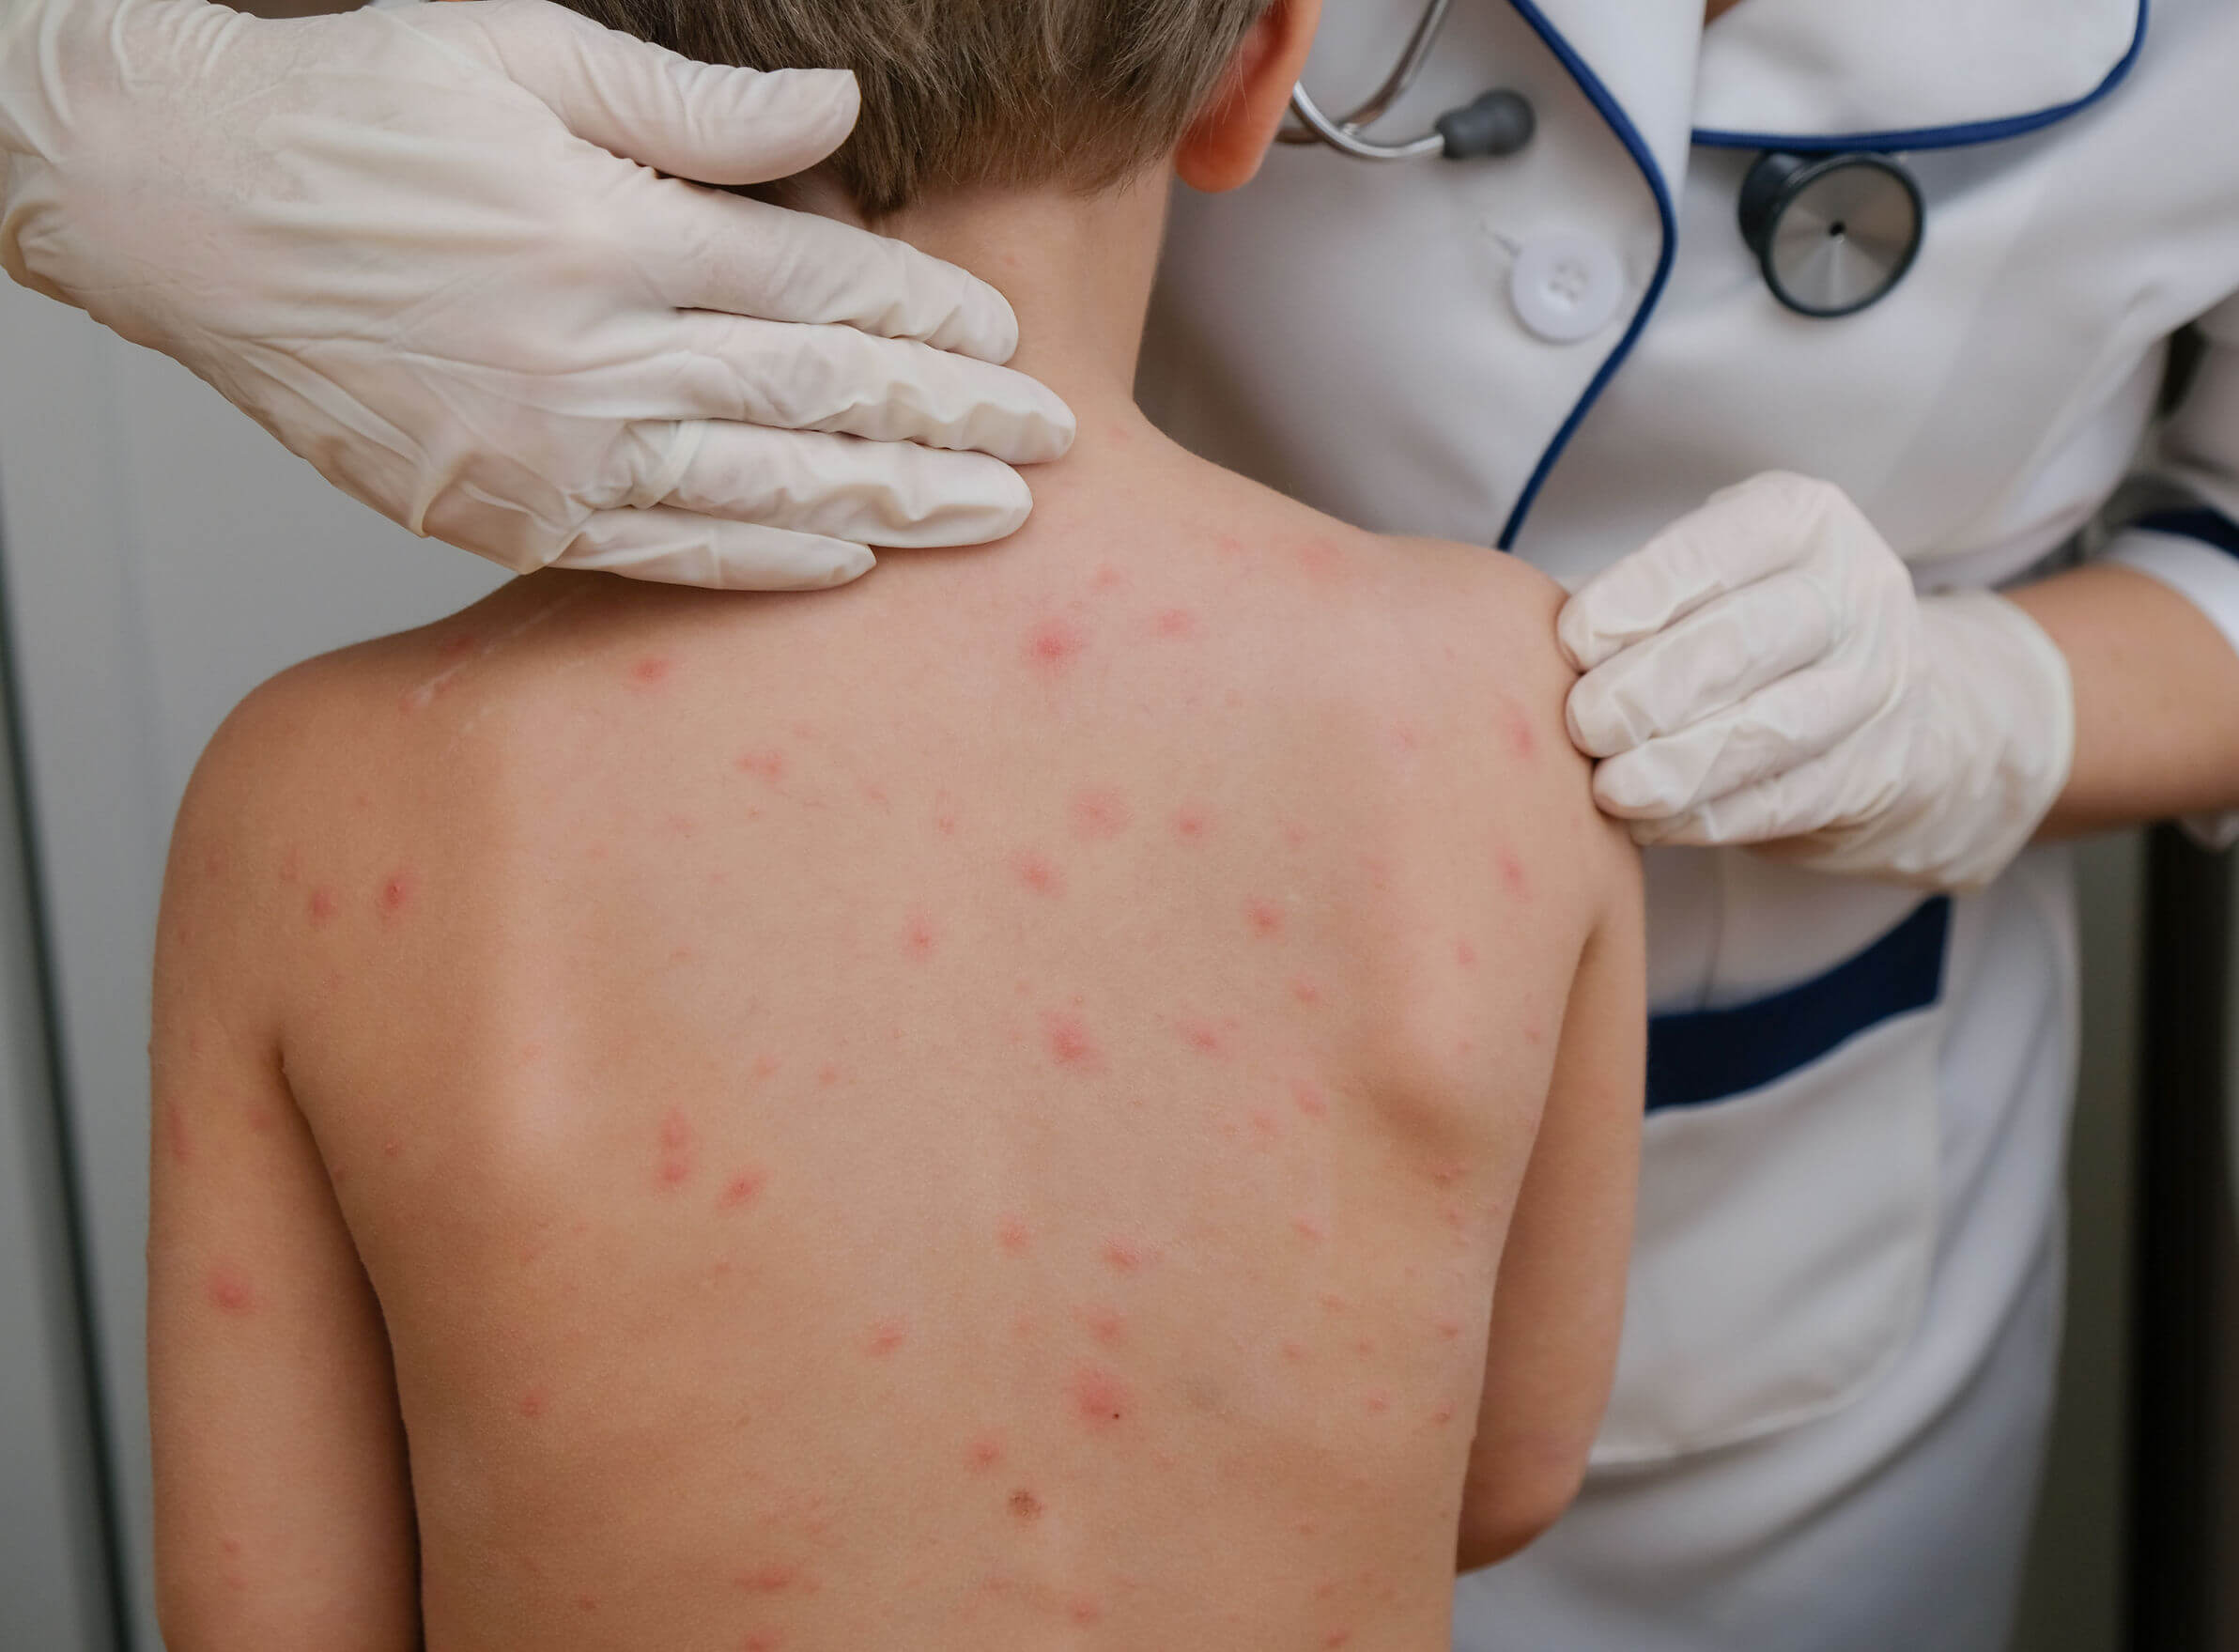 The most contagious diseases include measles